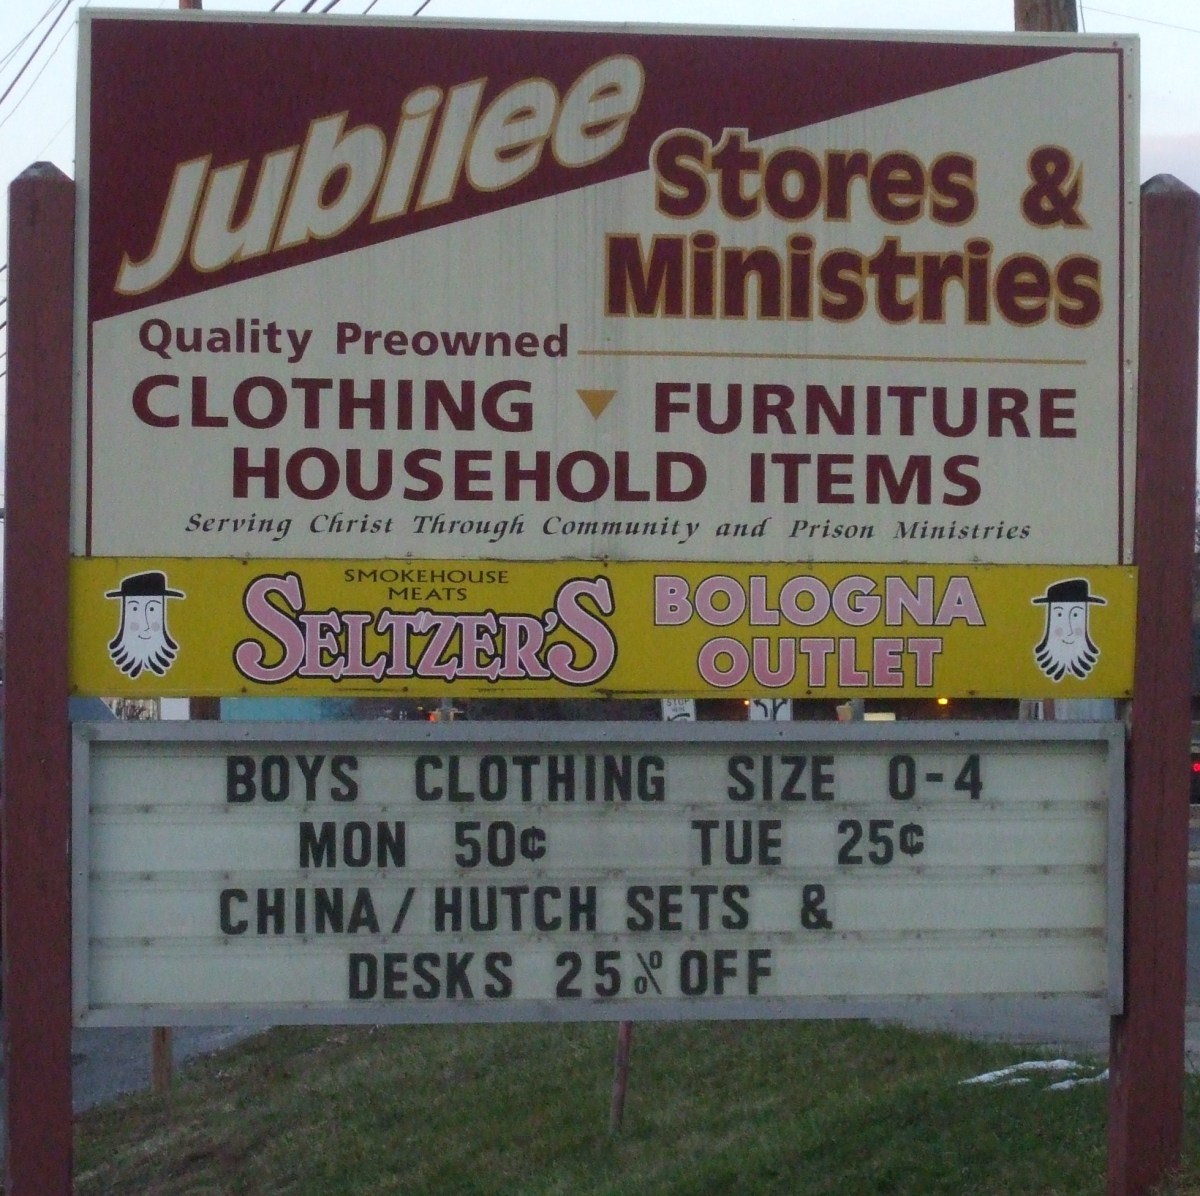 The sign outside the main Jubilee thrift store in Lebanon city.